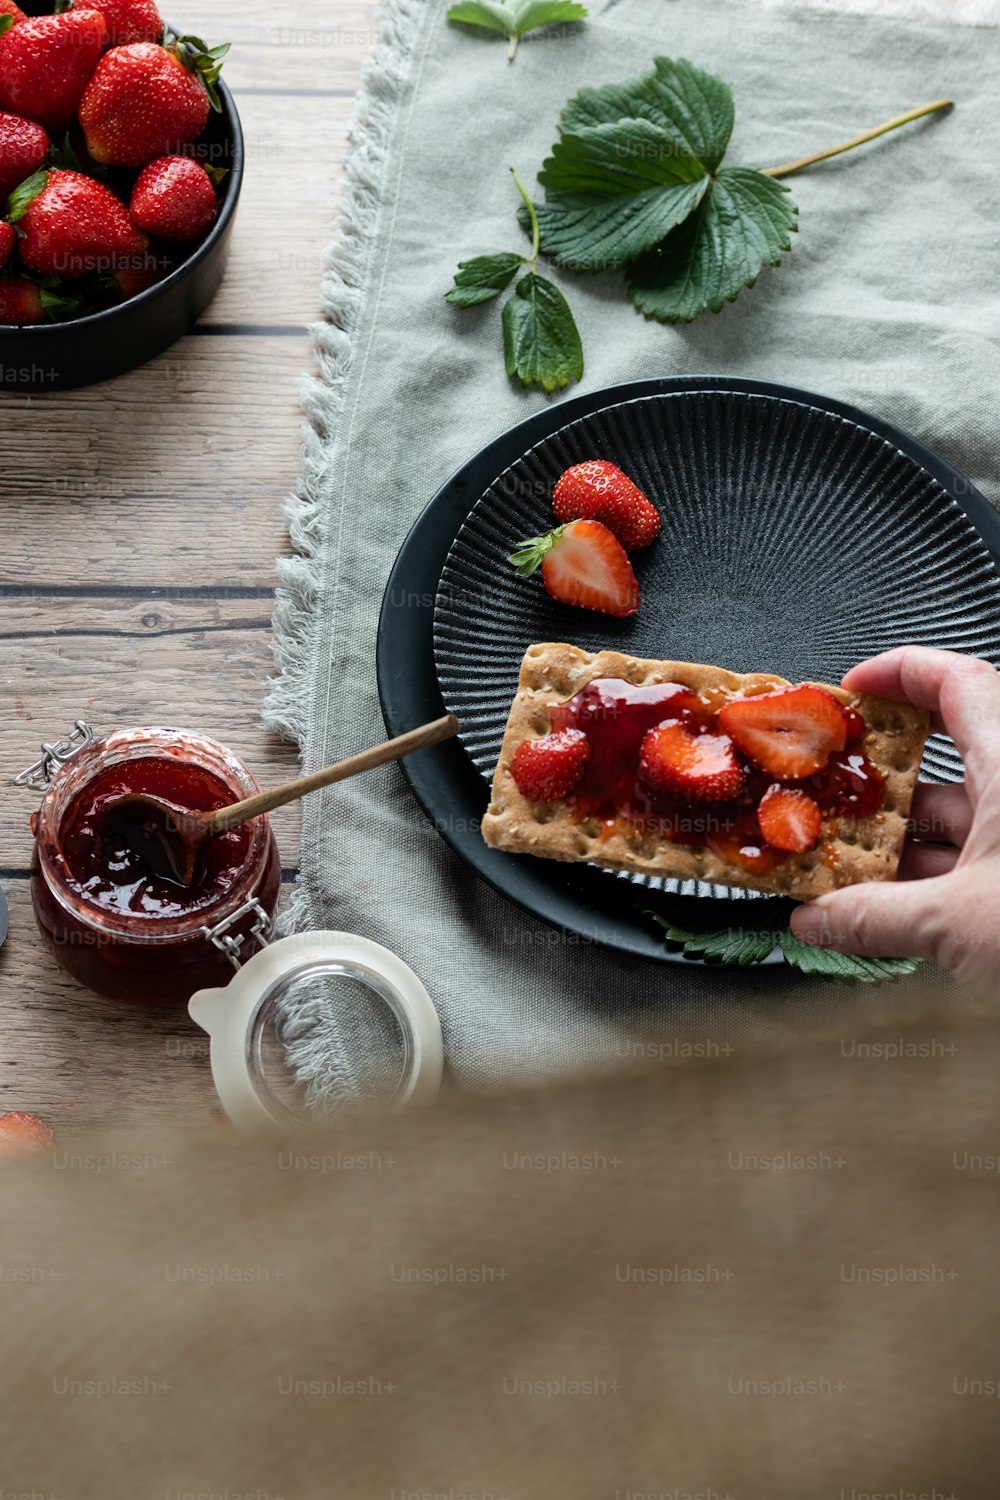 a person holding a piece of waffle with strawberries on it